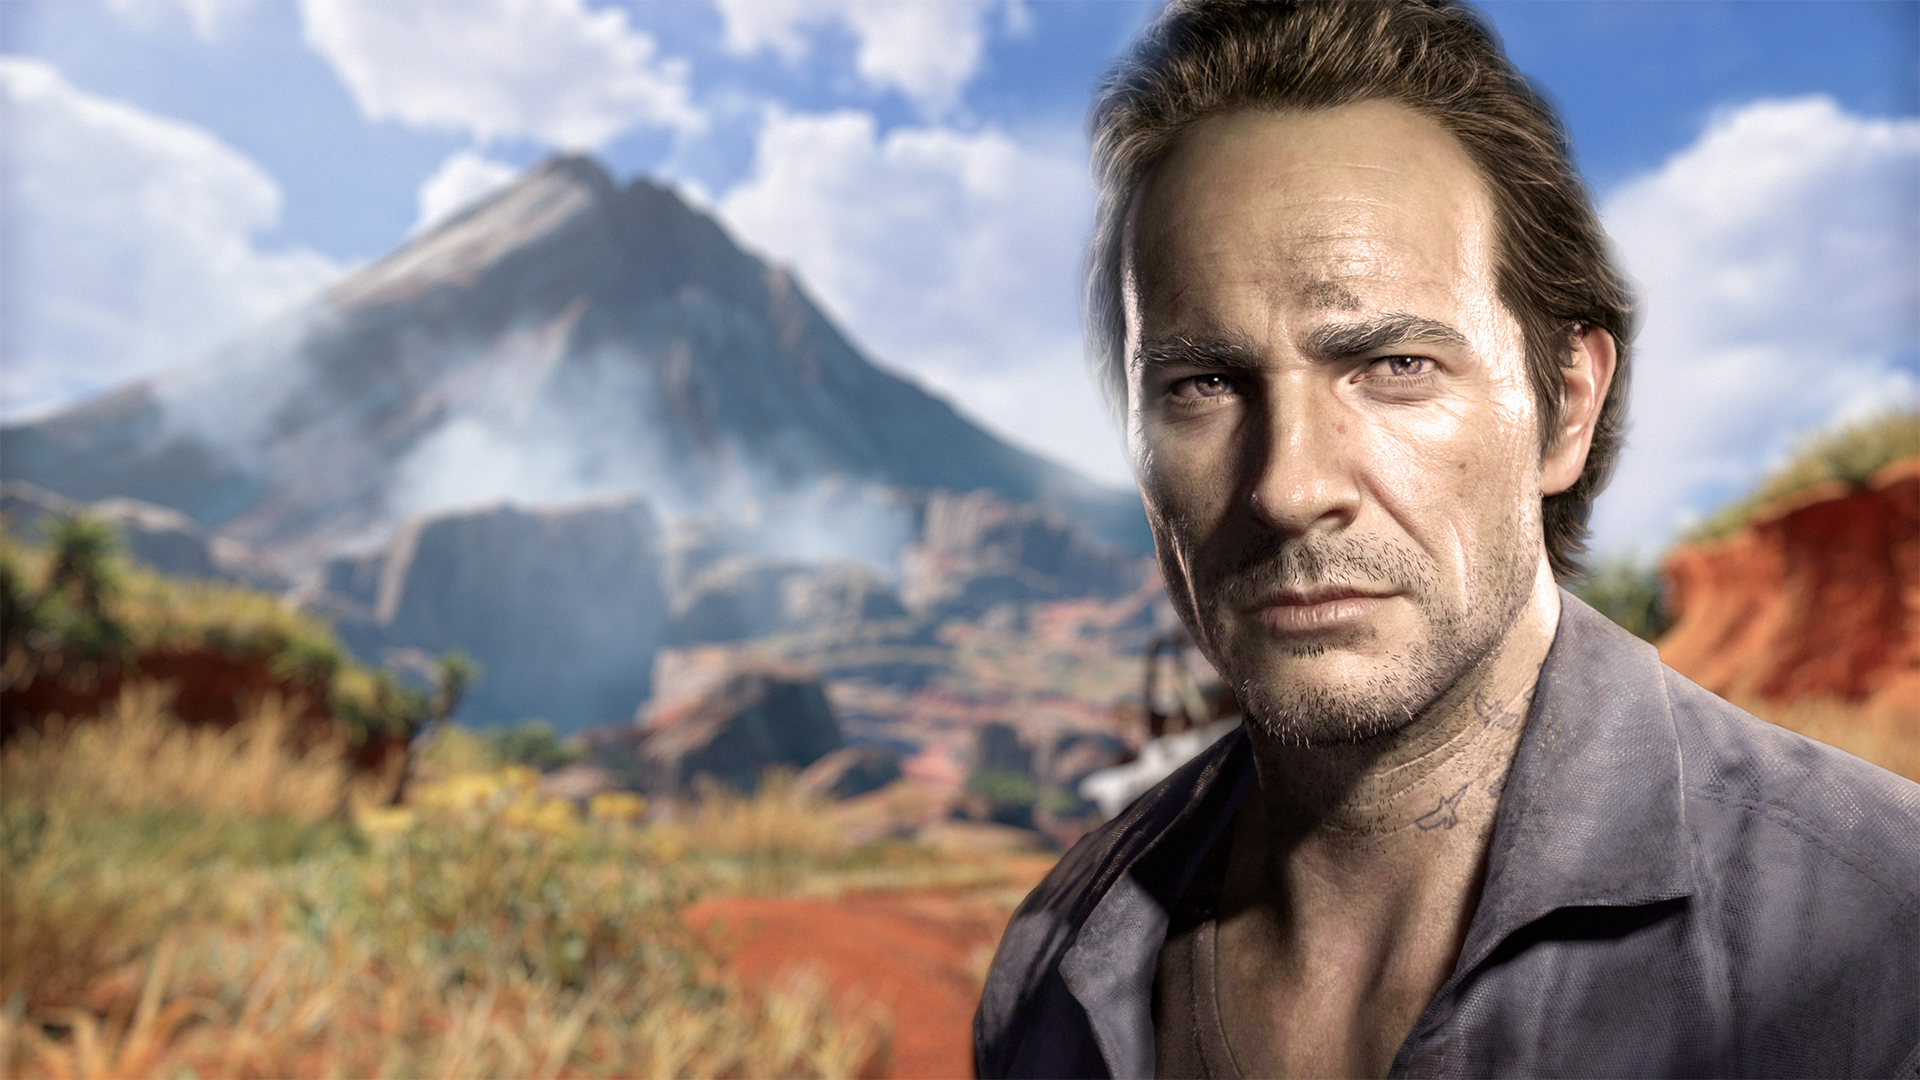 General 1920x1080 Samuel Drake Uncharted 4: A Thief's End Sam video games Naughty Dog video game characters